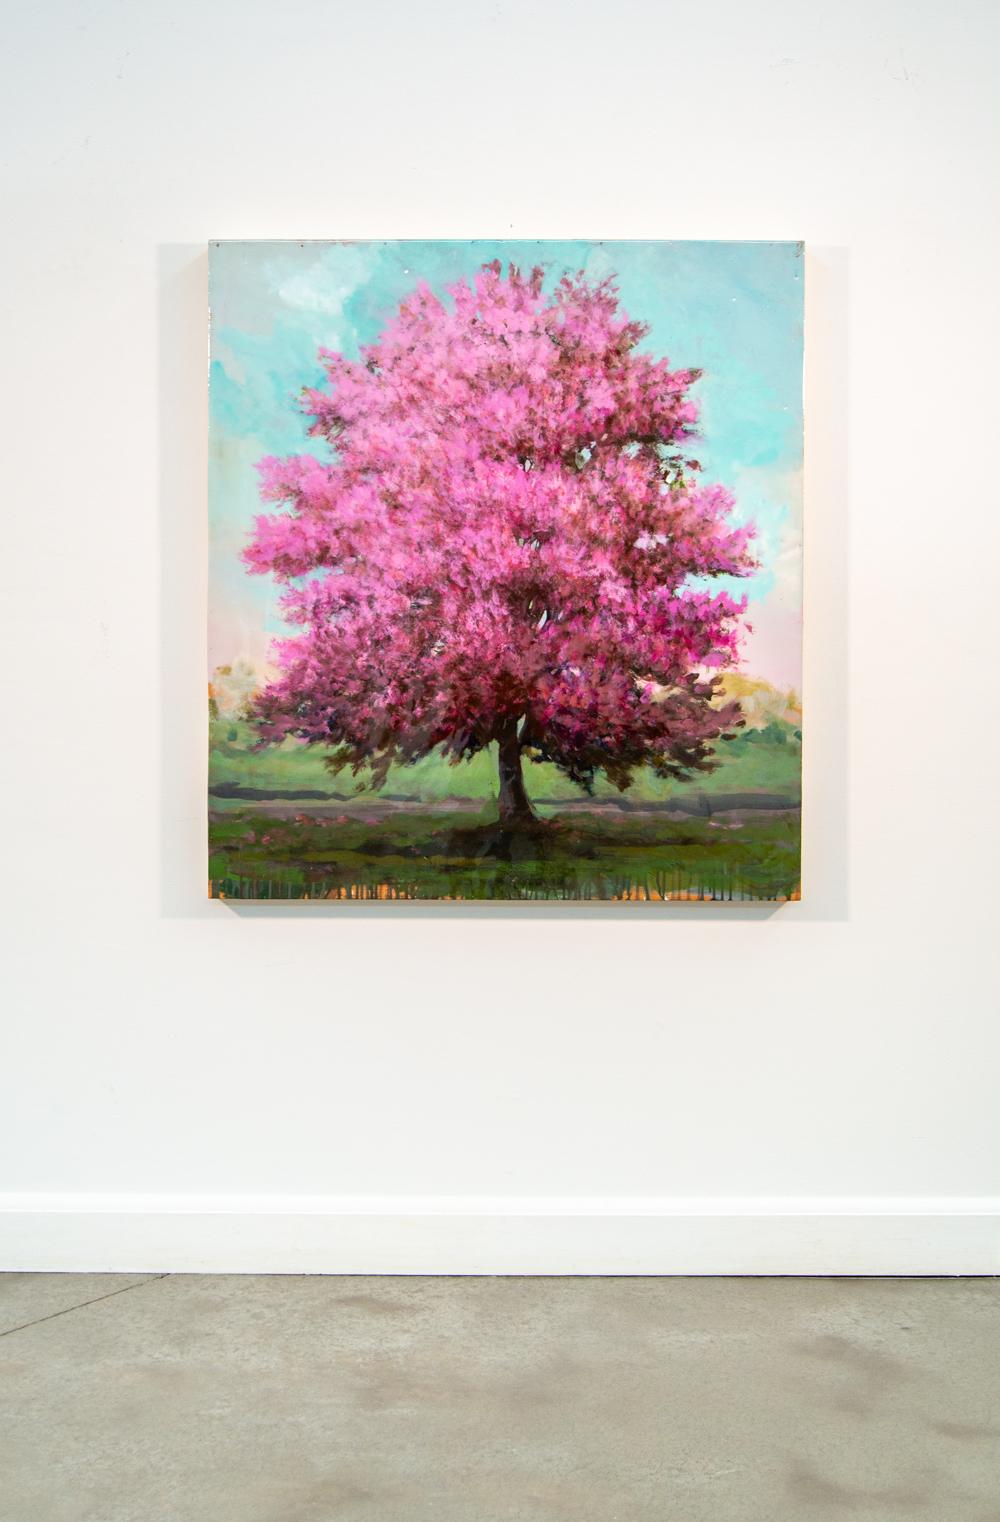 The bright pink of spring apple blossoms set against a turquoise blue sky and fields of green is captured in this lovely landscape by Peter Hoffer. He has created an entire series of tree portraits. Each one expresses their individual shape and